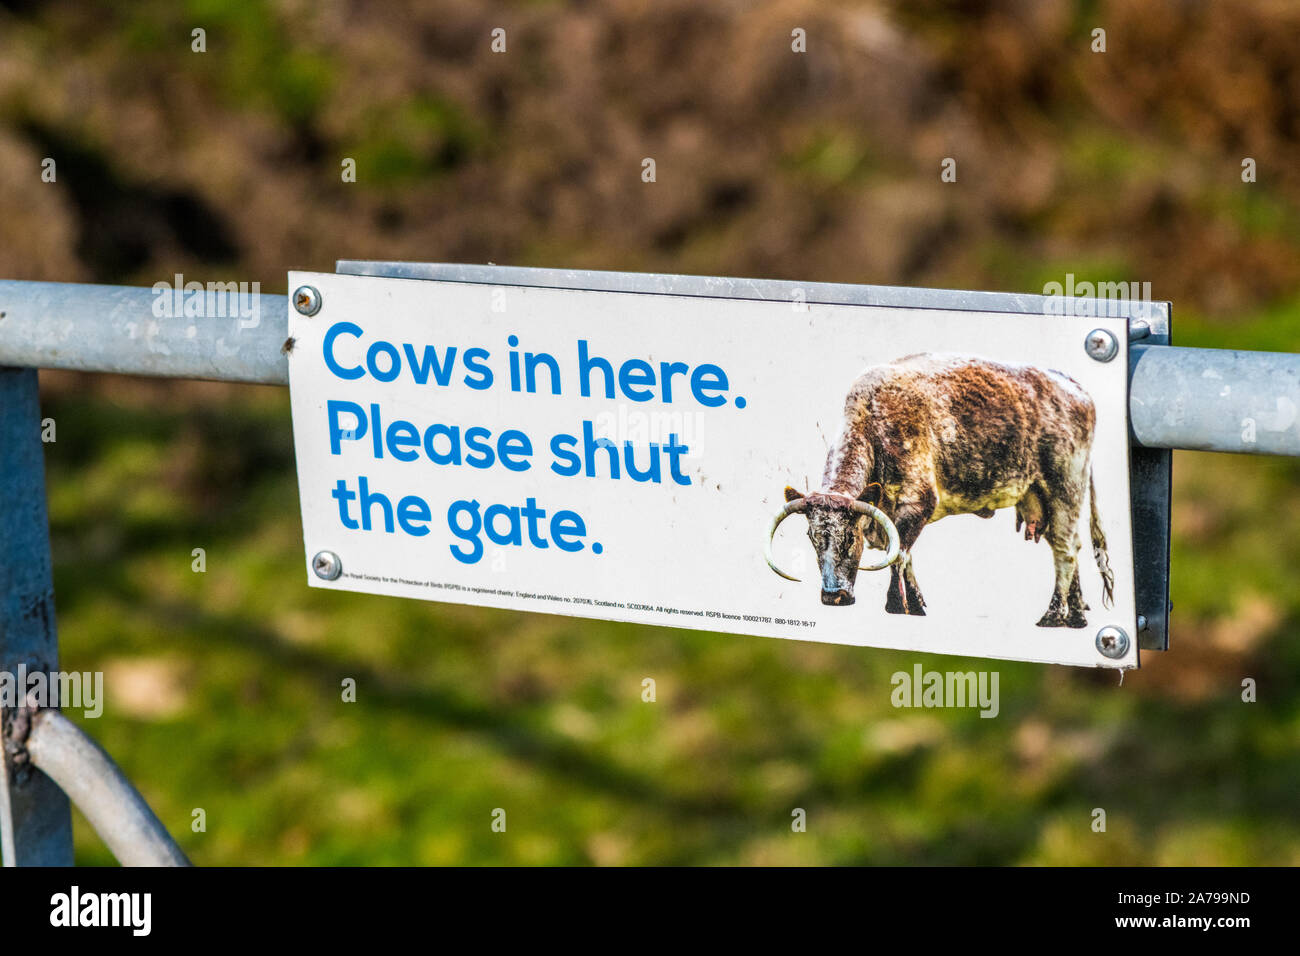 Cows in here. Please shut the gate. sign attached to a metal gate. Stock Photo